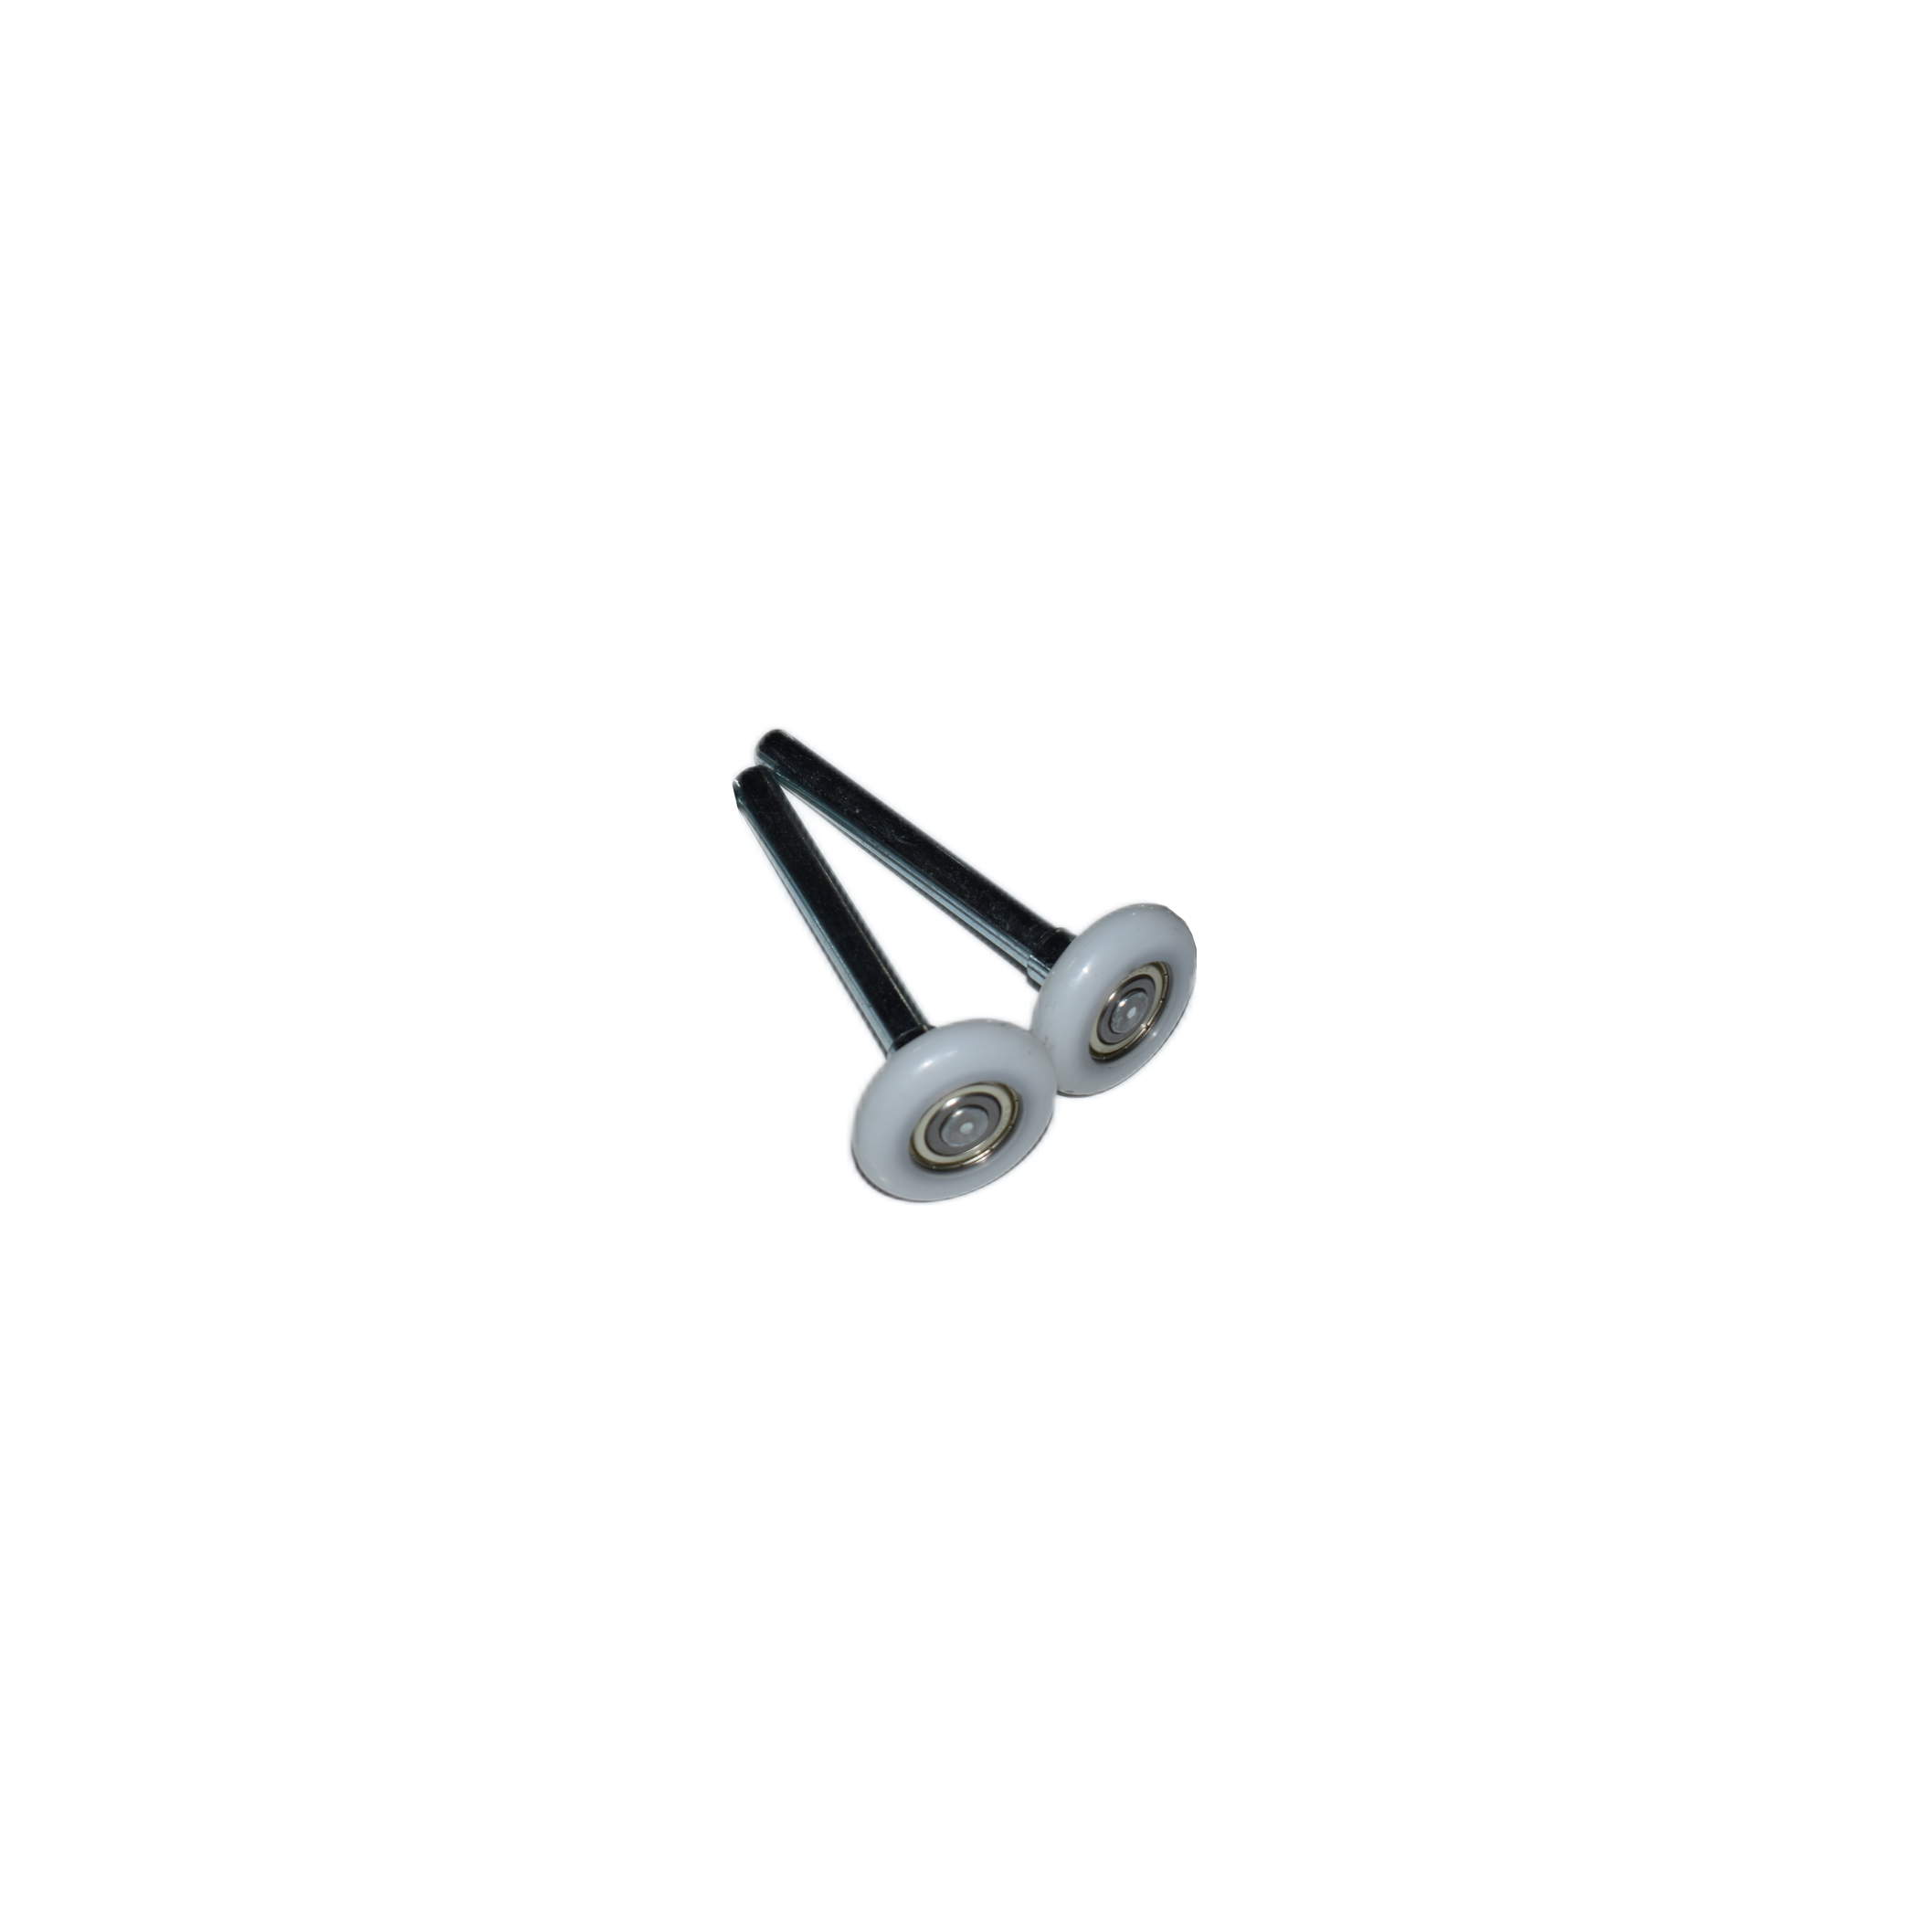 Garage Door Rollers with High Quality